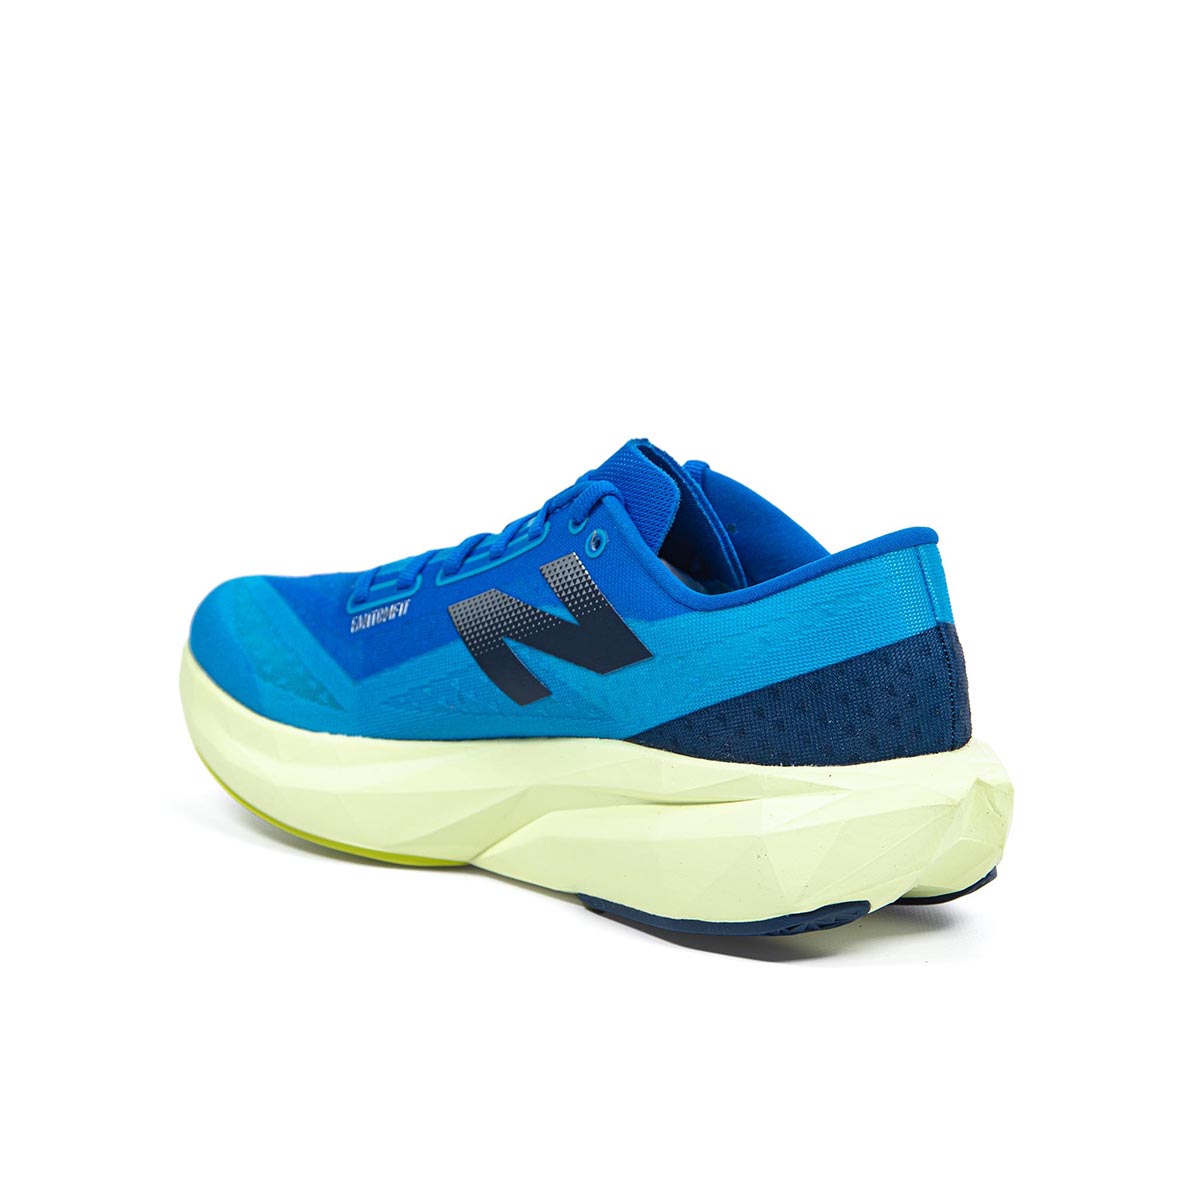 NEW BALANCE - FUELCELL REBEL V3